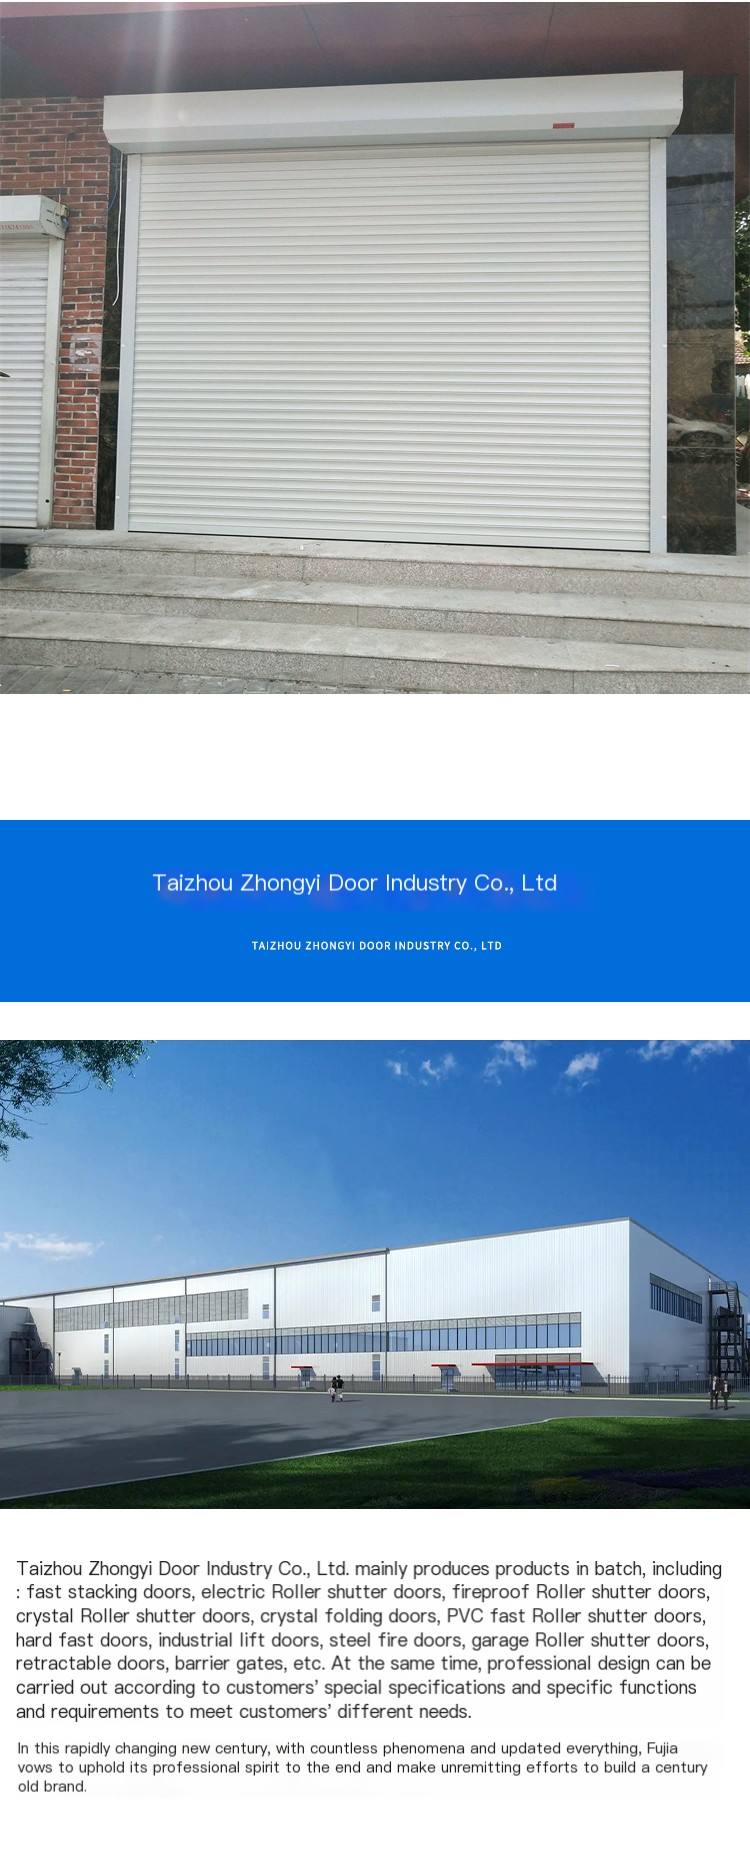 Zhongyi Villa's aluminum alloy rolling gate door-to-door service has a variety of styles and sizes